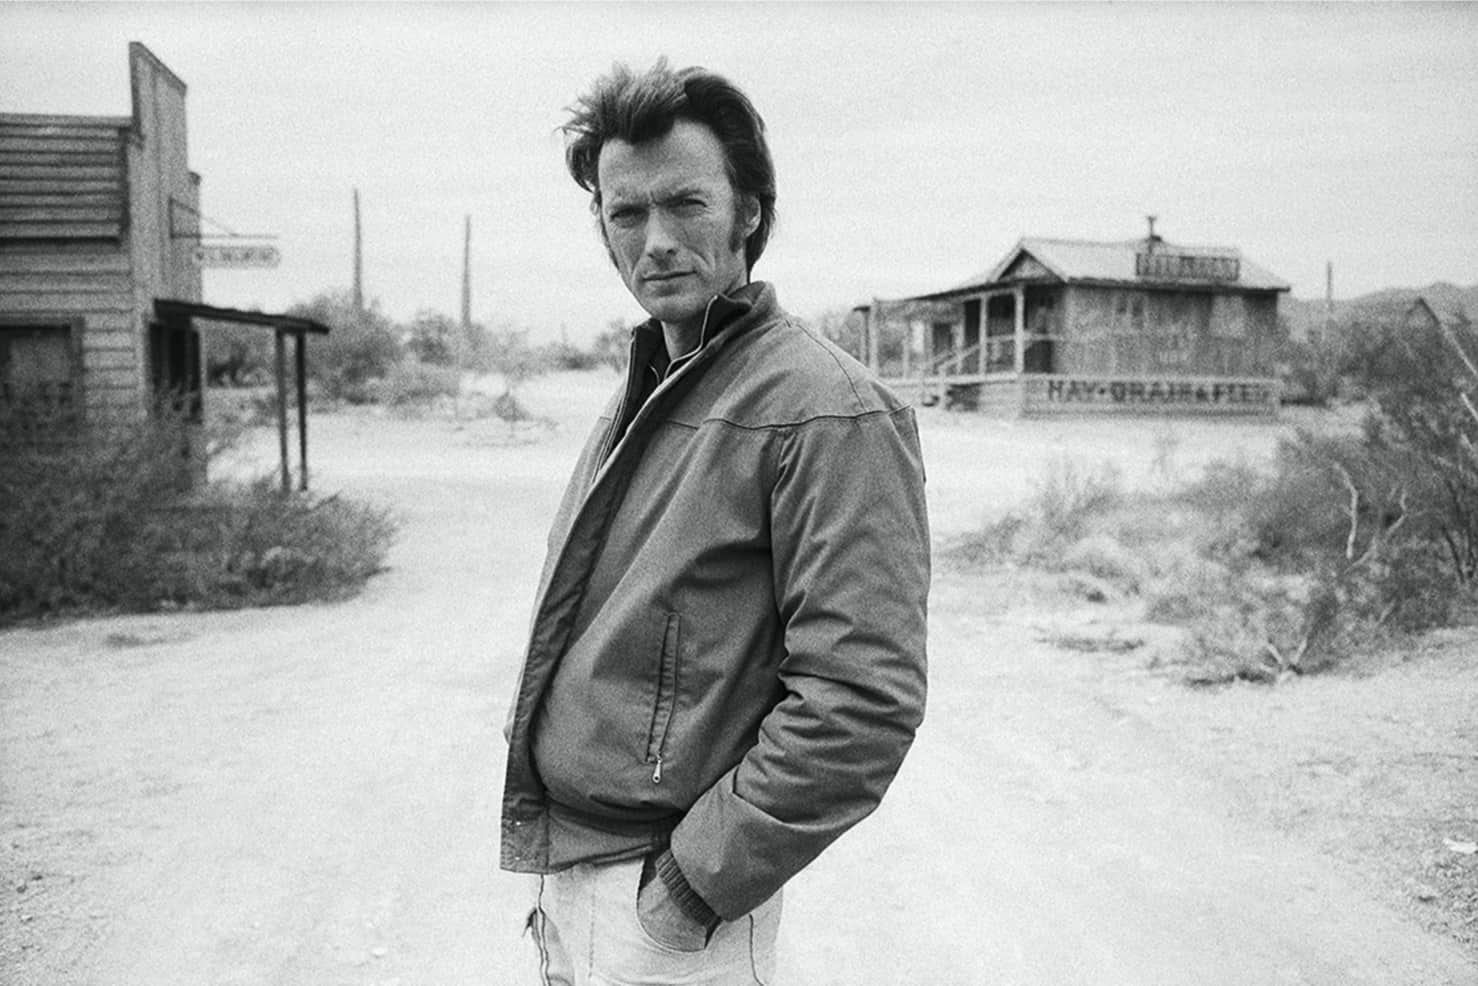 Terry O'Neill, Clint Eastwood, 1972